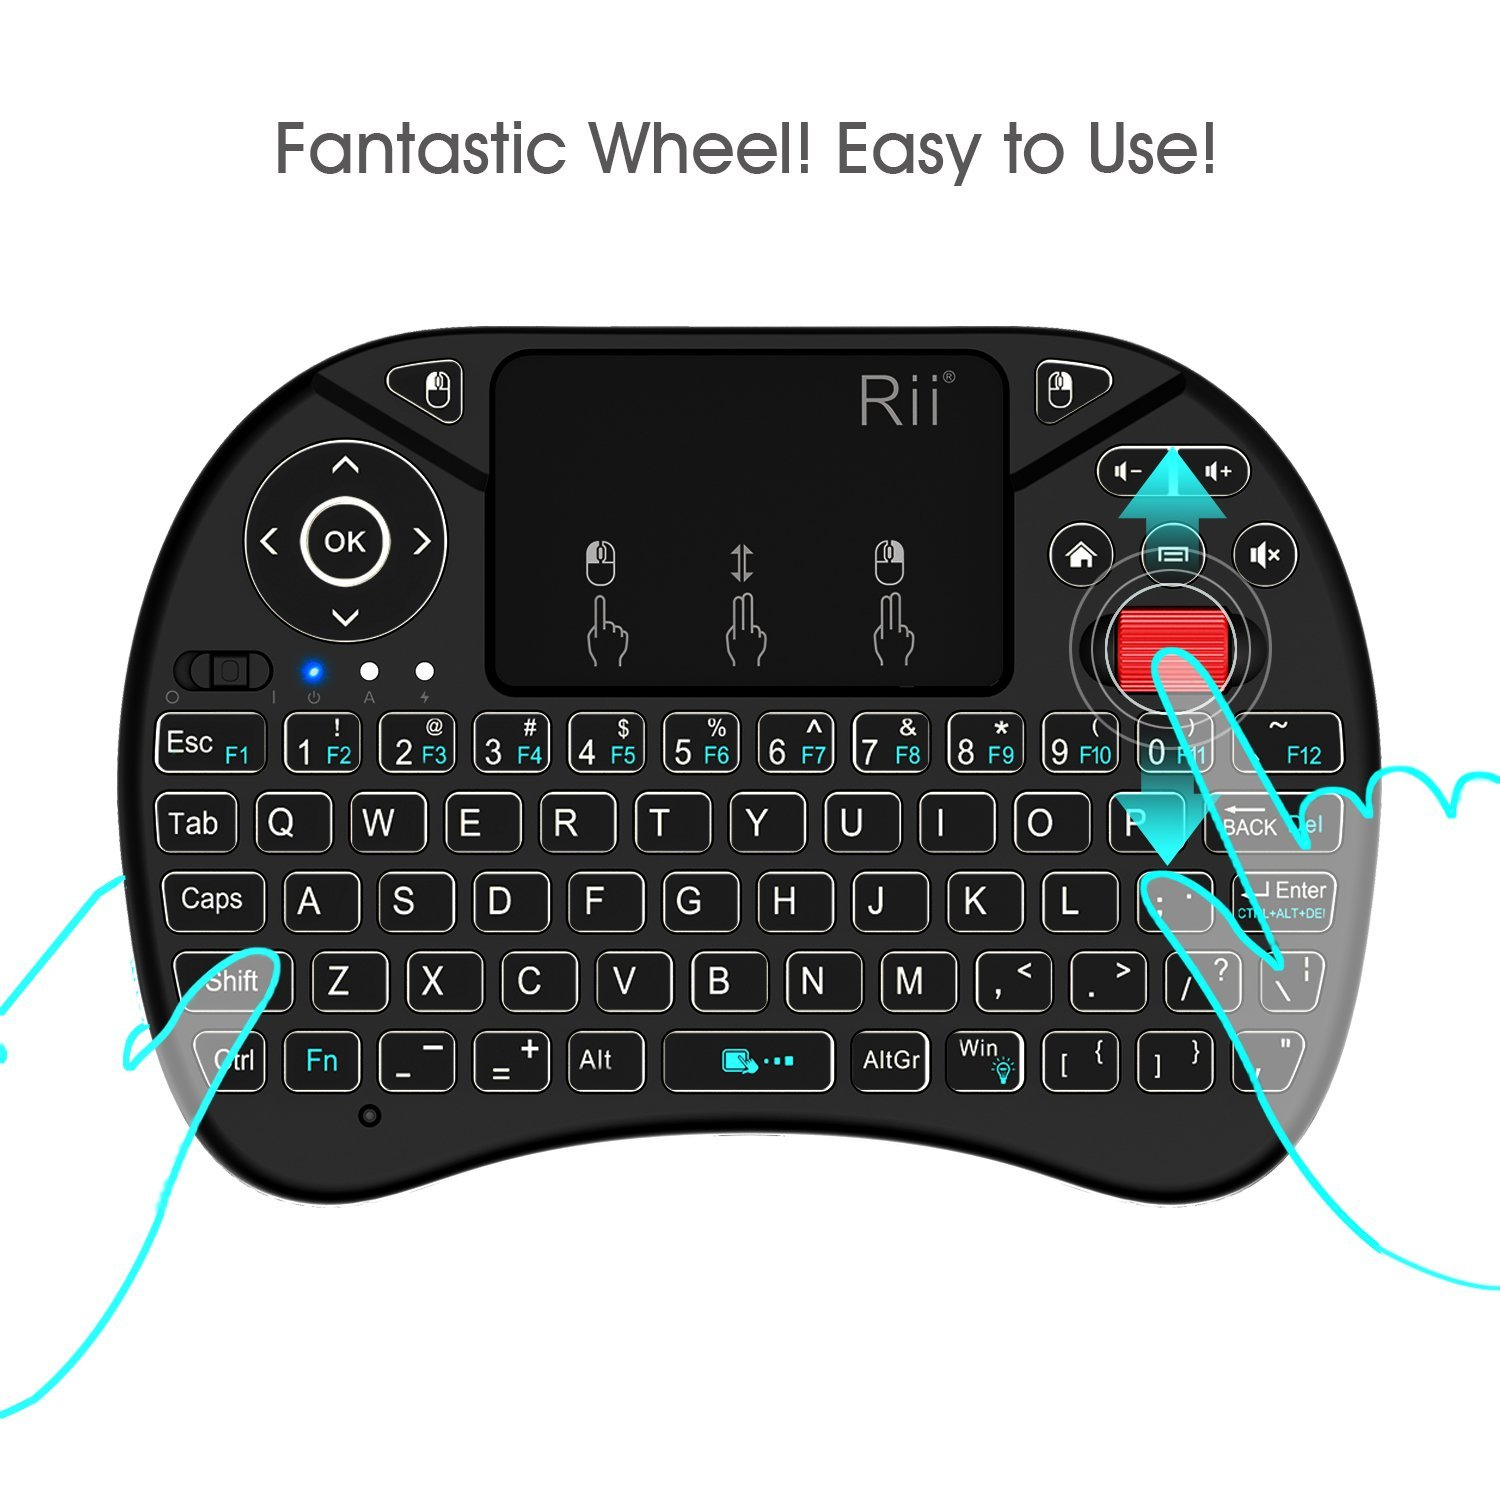 Rii X8 2.4GHz Mini Wireless Keyboard with Touchpad Mouse Combo, LED Backlit, Rechargable Li-ion Battery